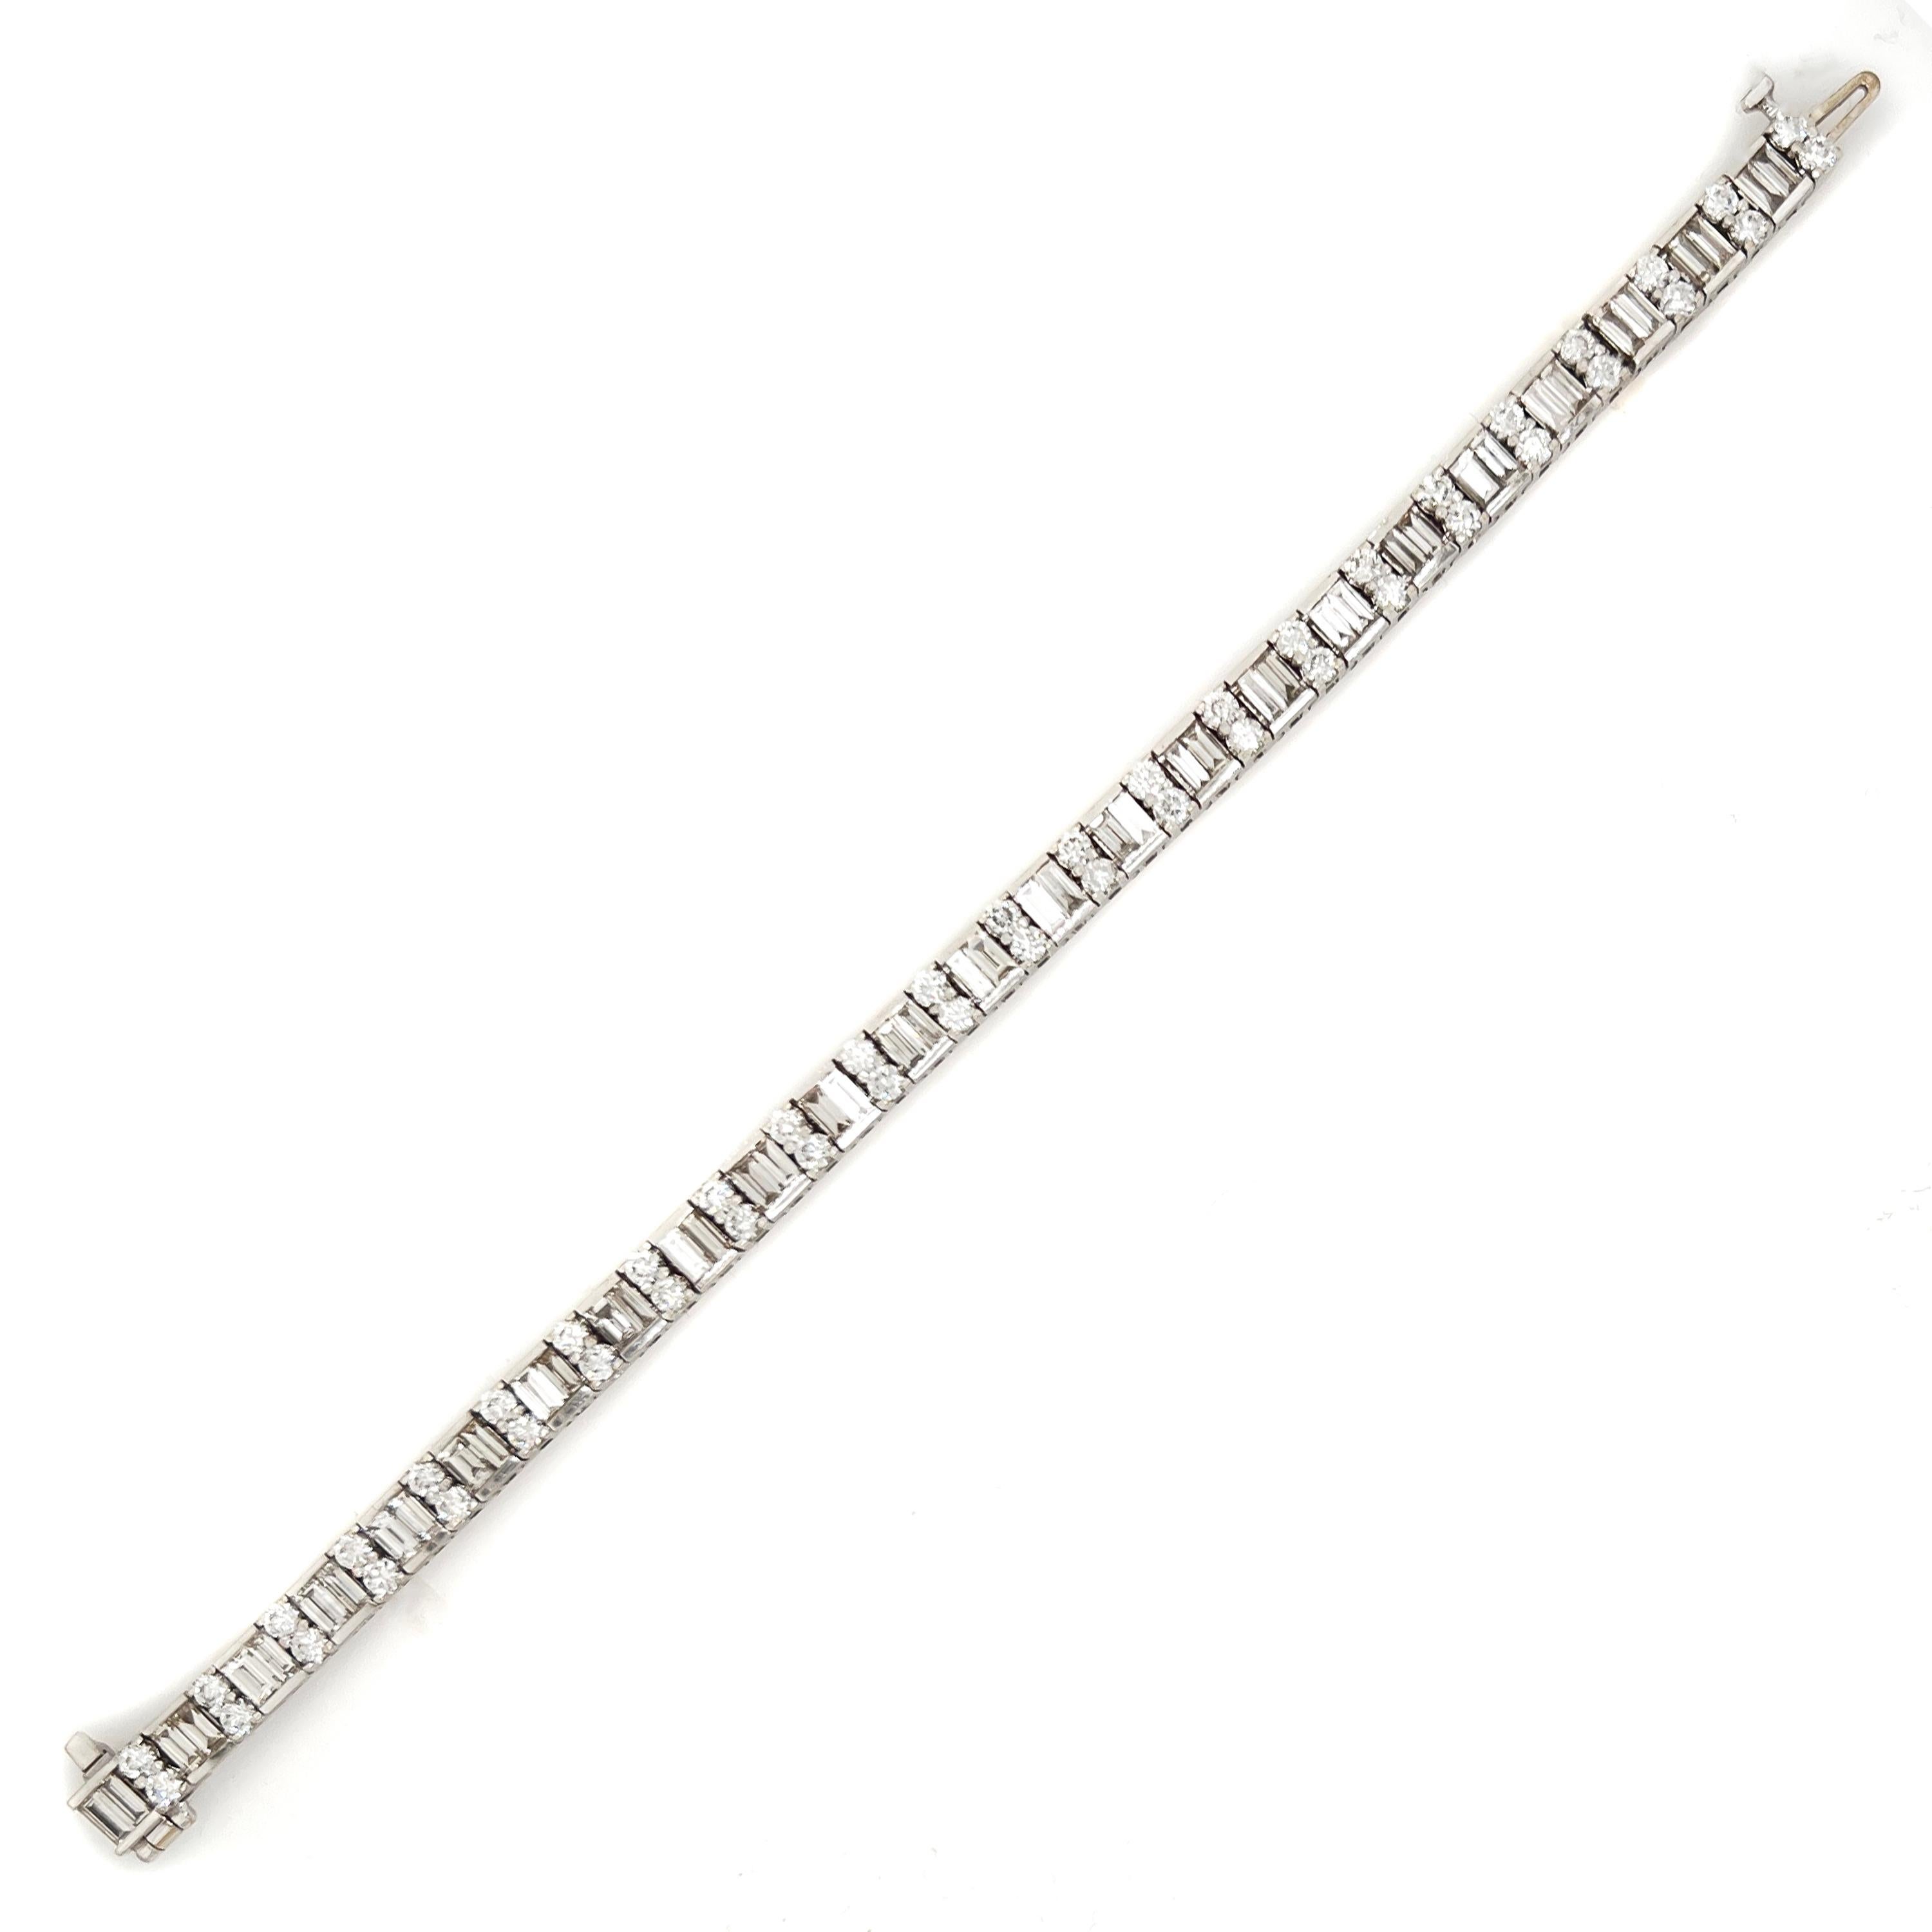 14K White Gold 10 Carat Round and Baguette Diamonds Tennis Bracelet

Apprx. 10 carats G-H color, VS-SI clarity round and baguette diamonds total weight

7 inches in length, 5.80mm in width (0.22 inch)